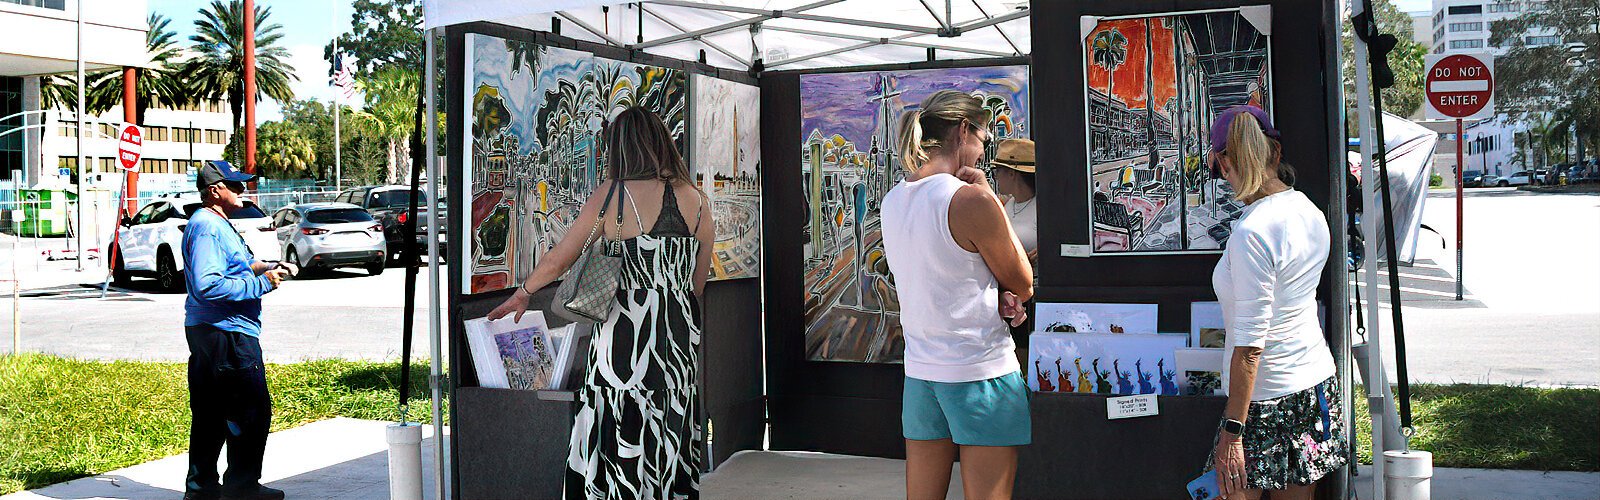 The vibrant energy in the cityscape artwork of Patricia Kluwe Derderian attracts visitors to her booth at Coachman Park’s “Art in the Park."